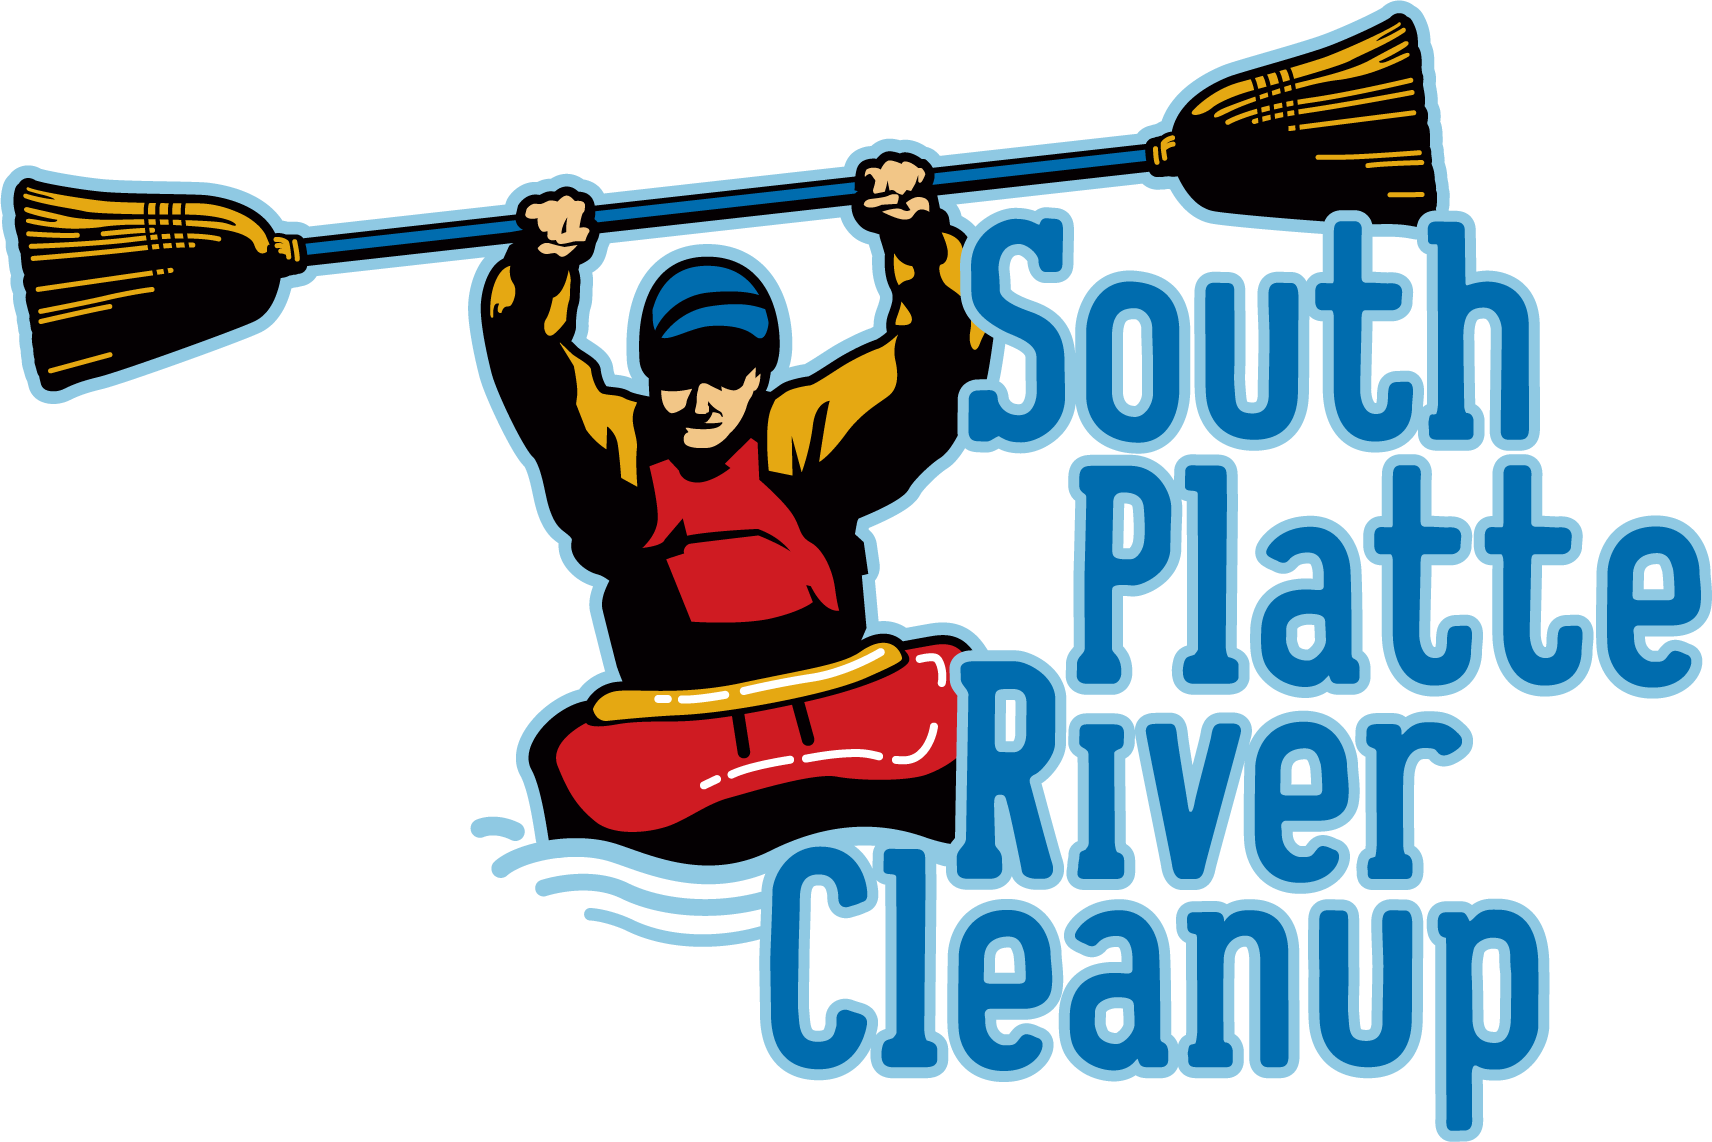 13th Annual South Platte River Clean-up - South Platte River Cleanup 2016 (1712x1142)